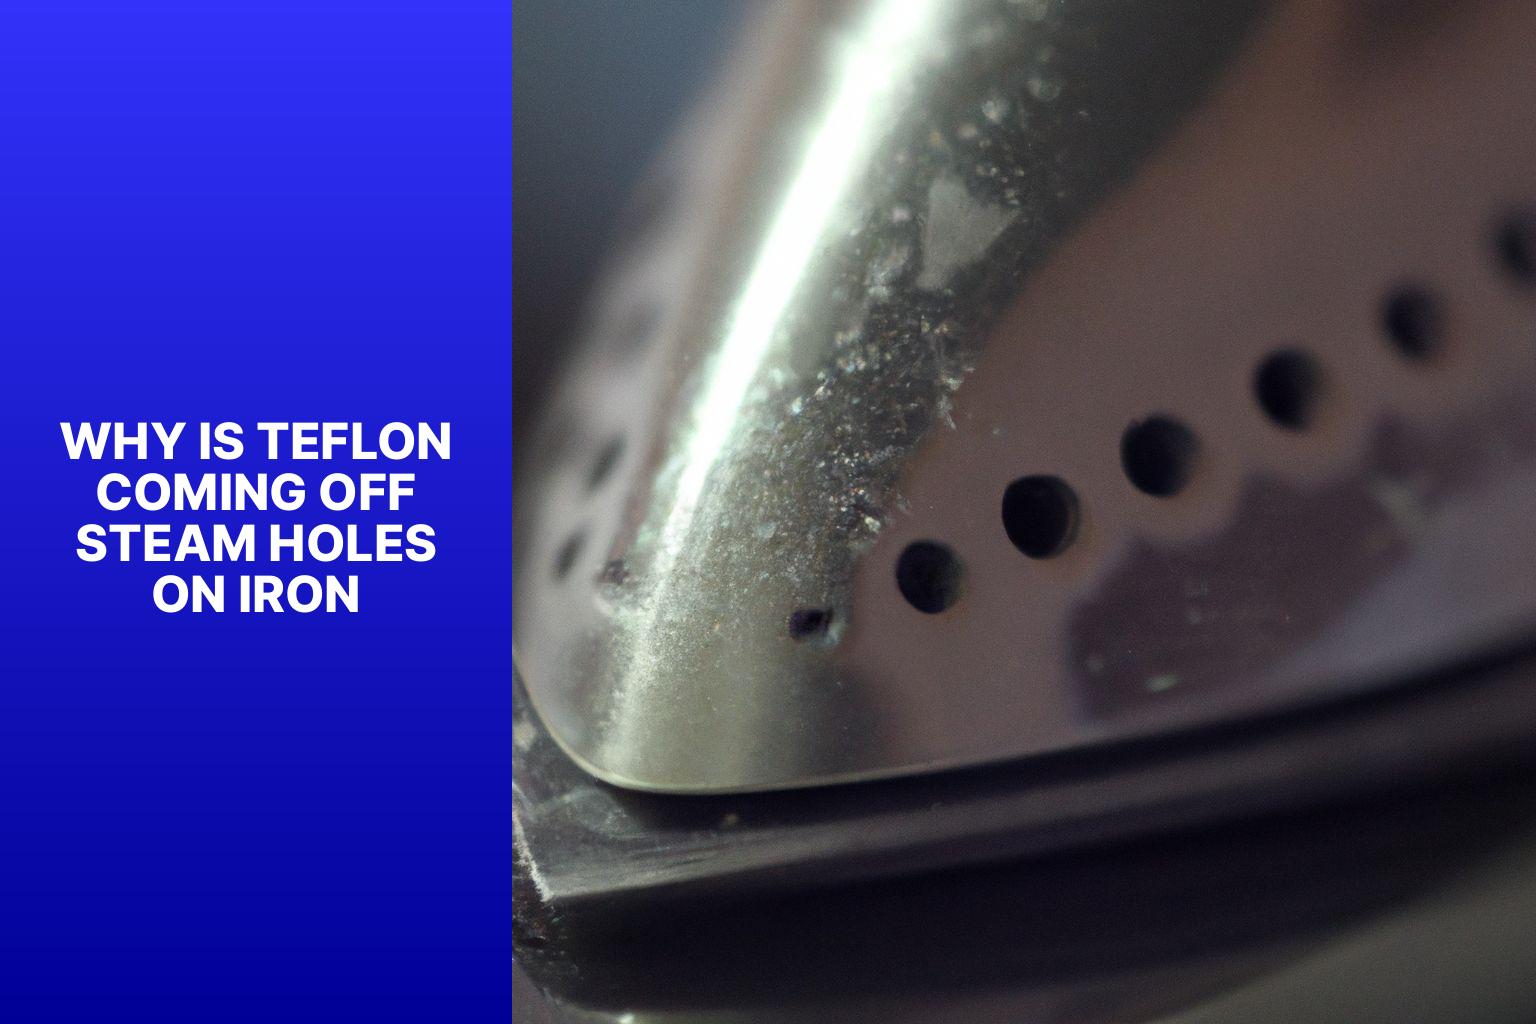 Why Is Teflon Coming Off Steam Holes On Iron